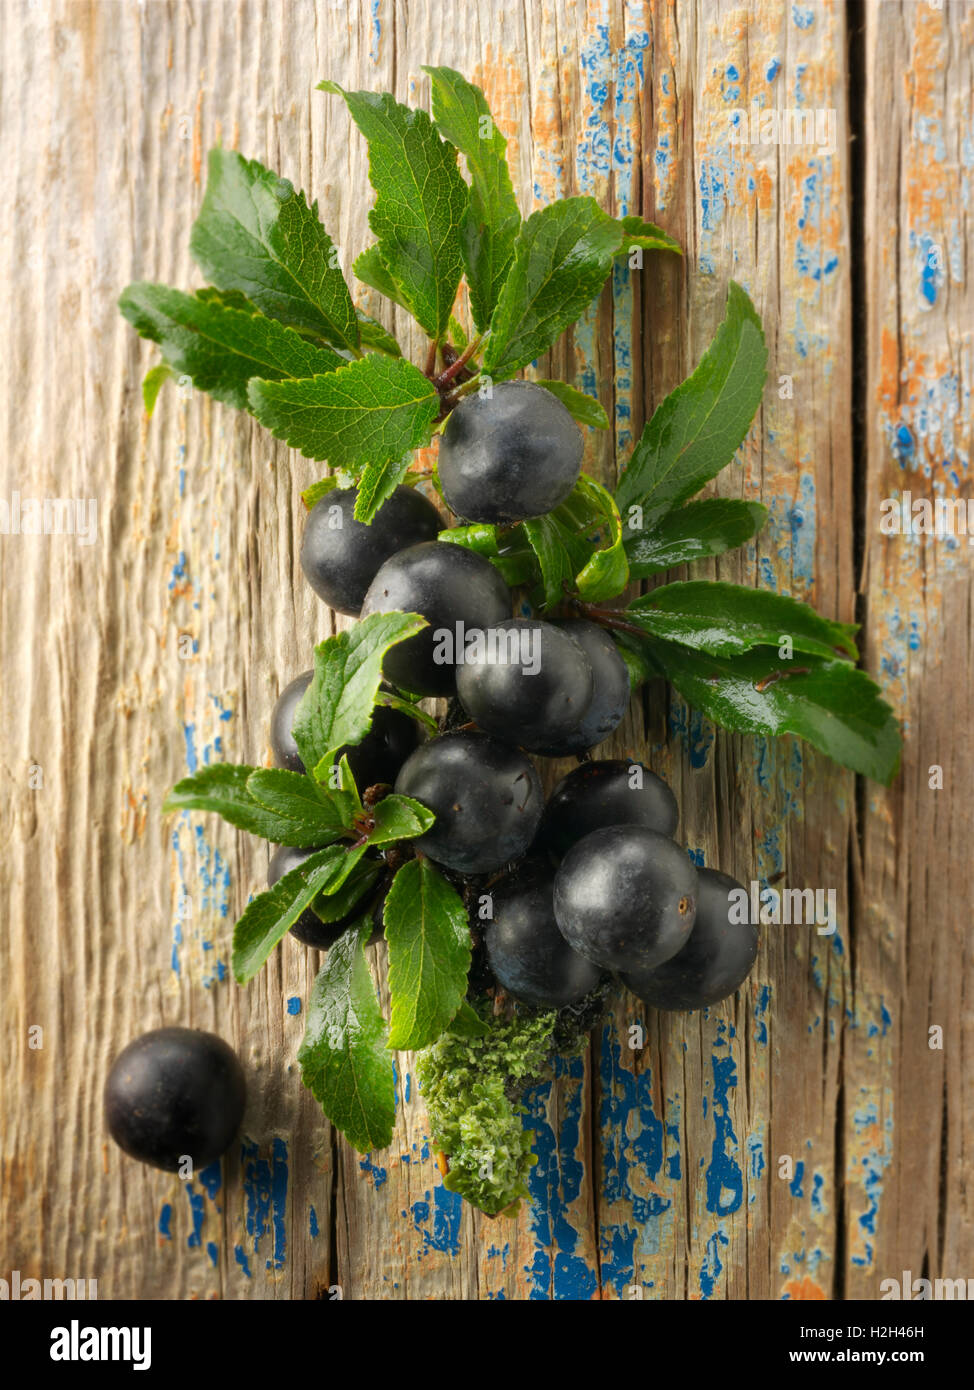 Fresh picked sloe berries and leaves from the blackthorn bush (Prunus spinosa ) Stock Photo